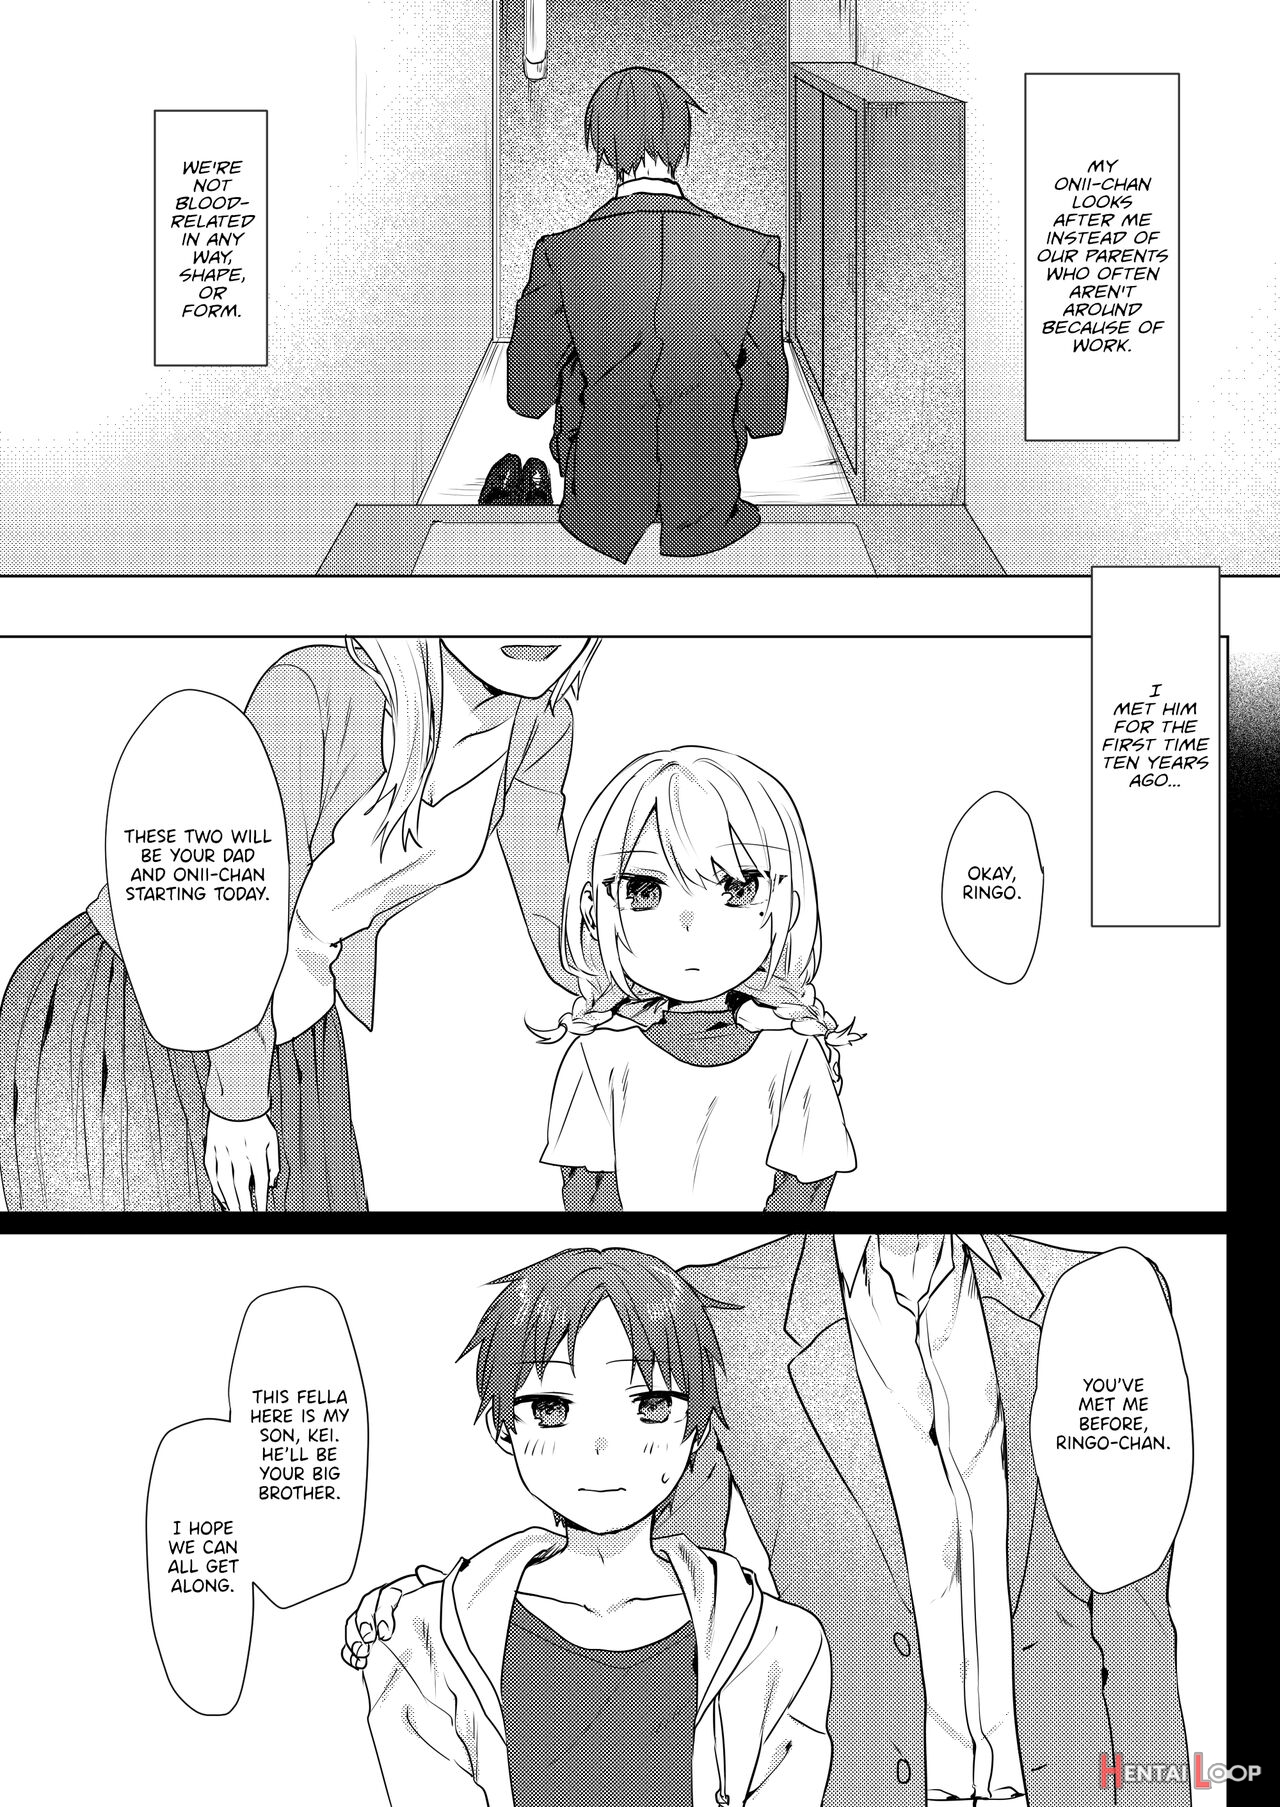 A Plan To Seduce My Onii-chan page 7